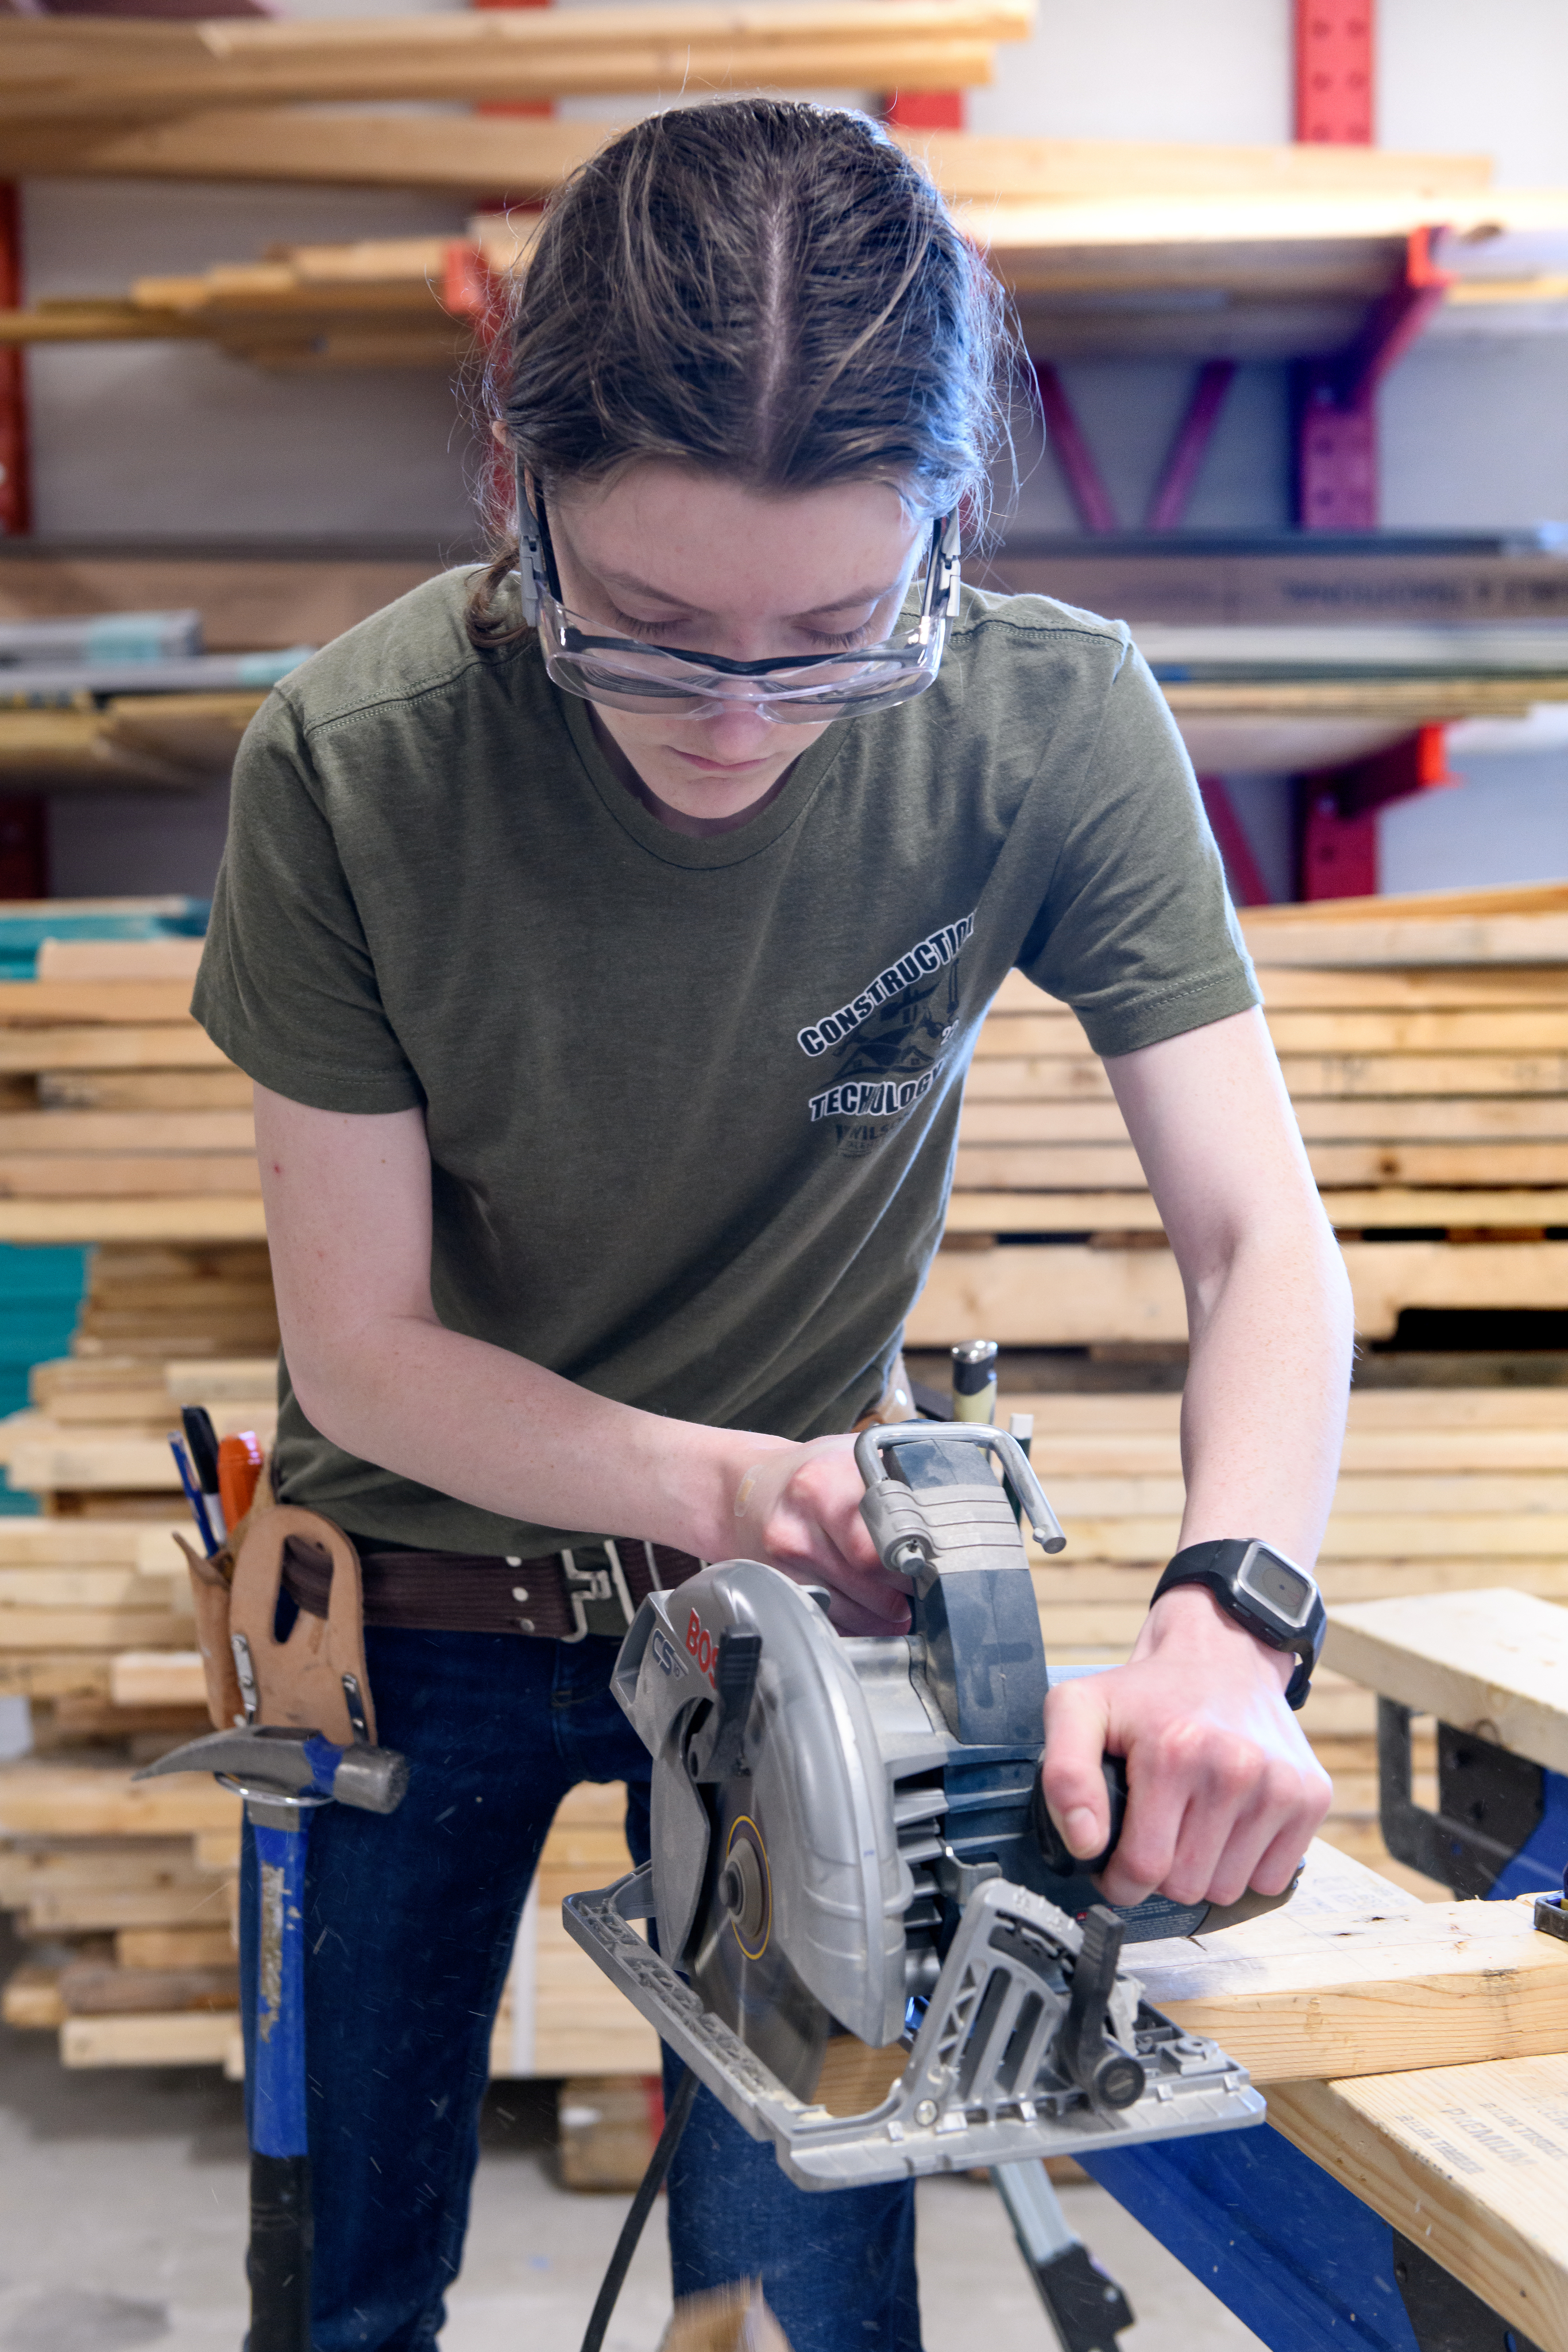 Female construction student uses a handsaw in the construction lab to cut a 2 x 4.